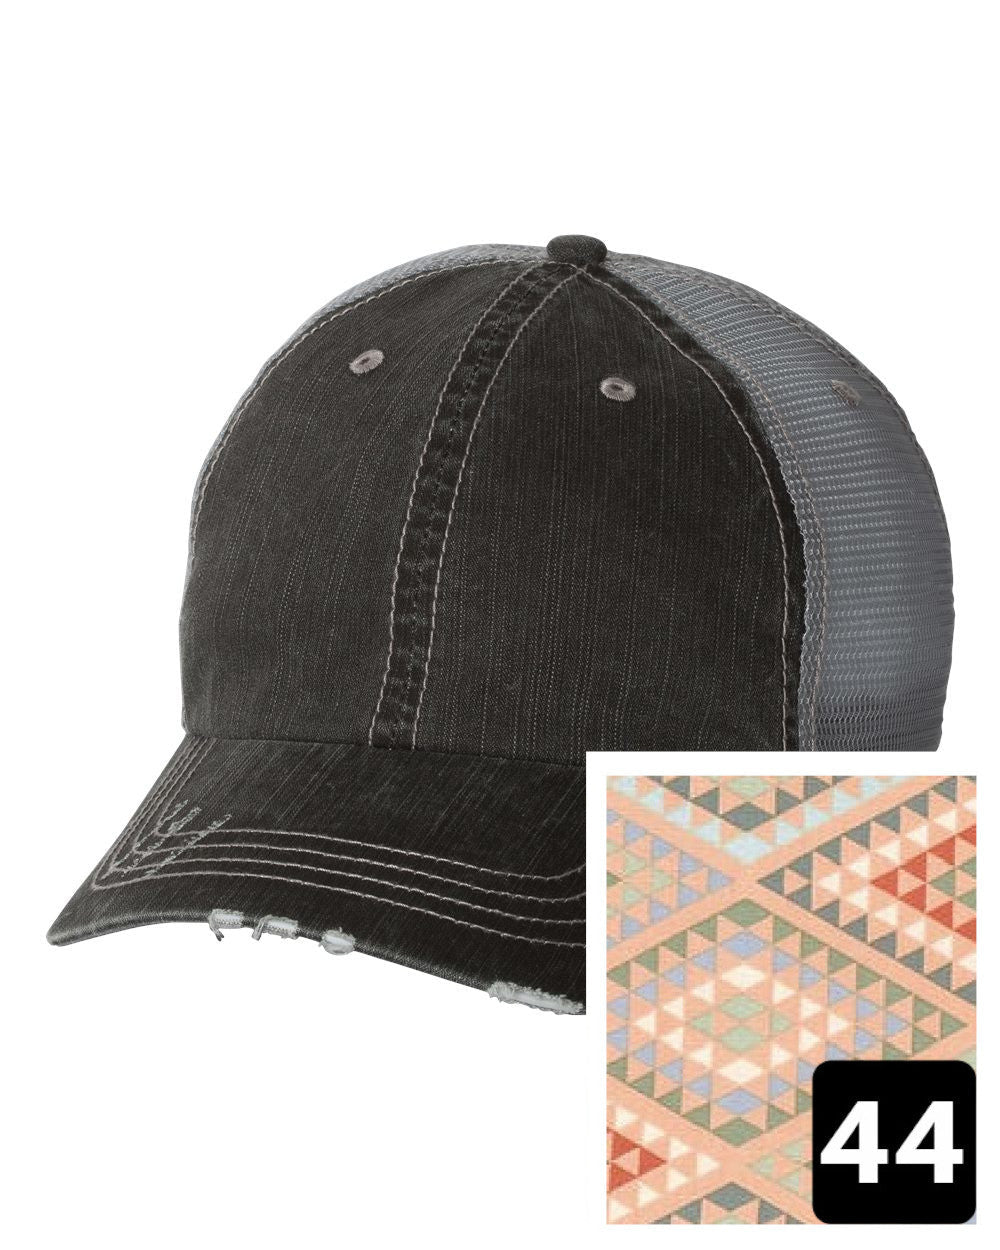 gray distressed trucker hat with navy coral and white chevron fabric state of Idaho